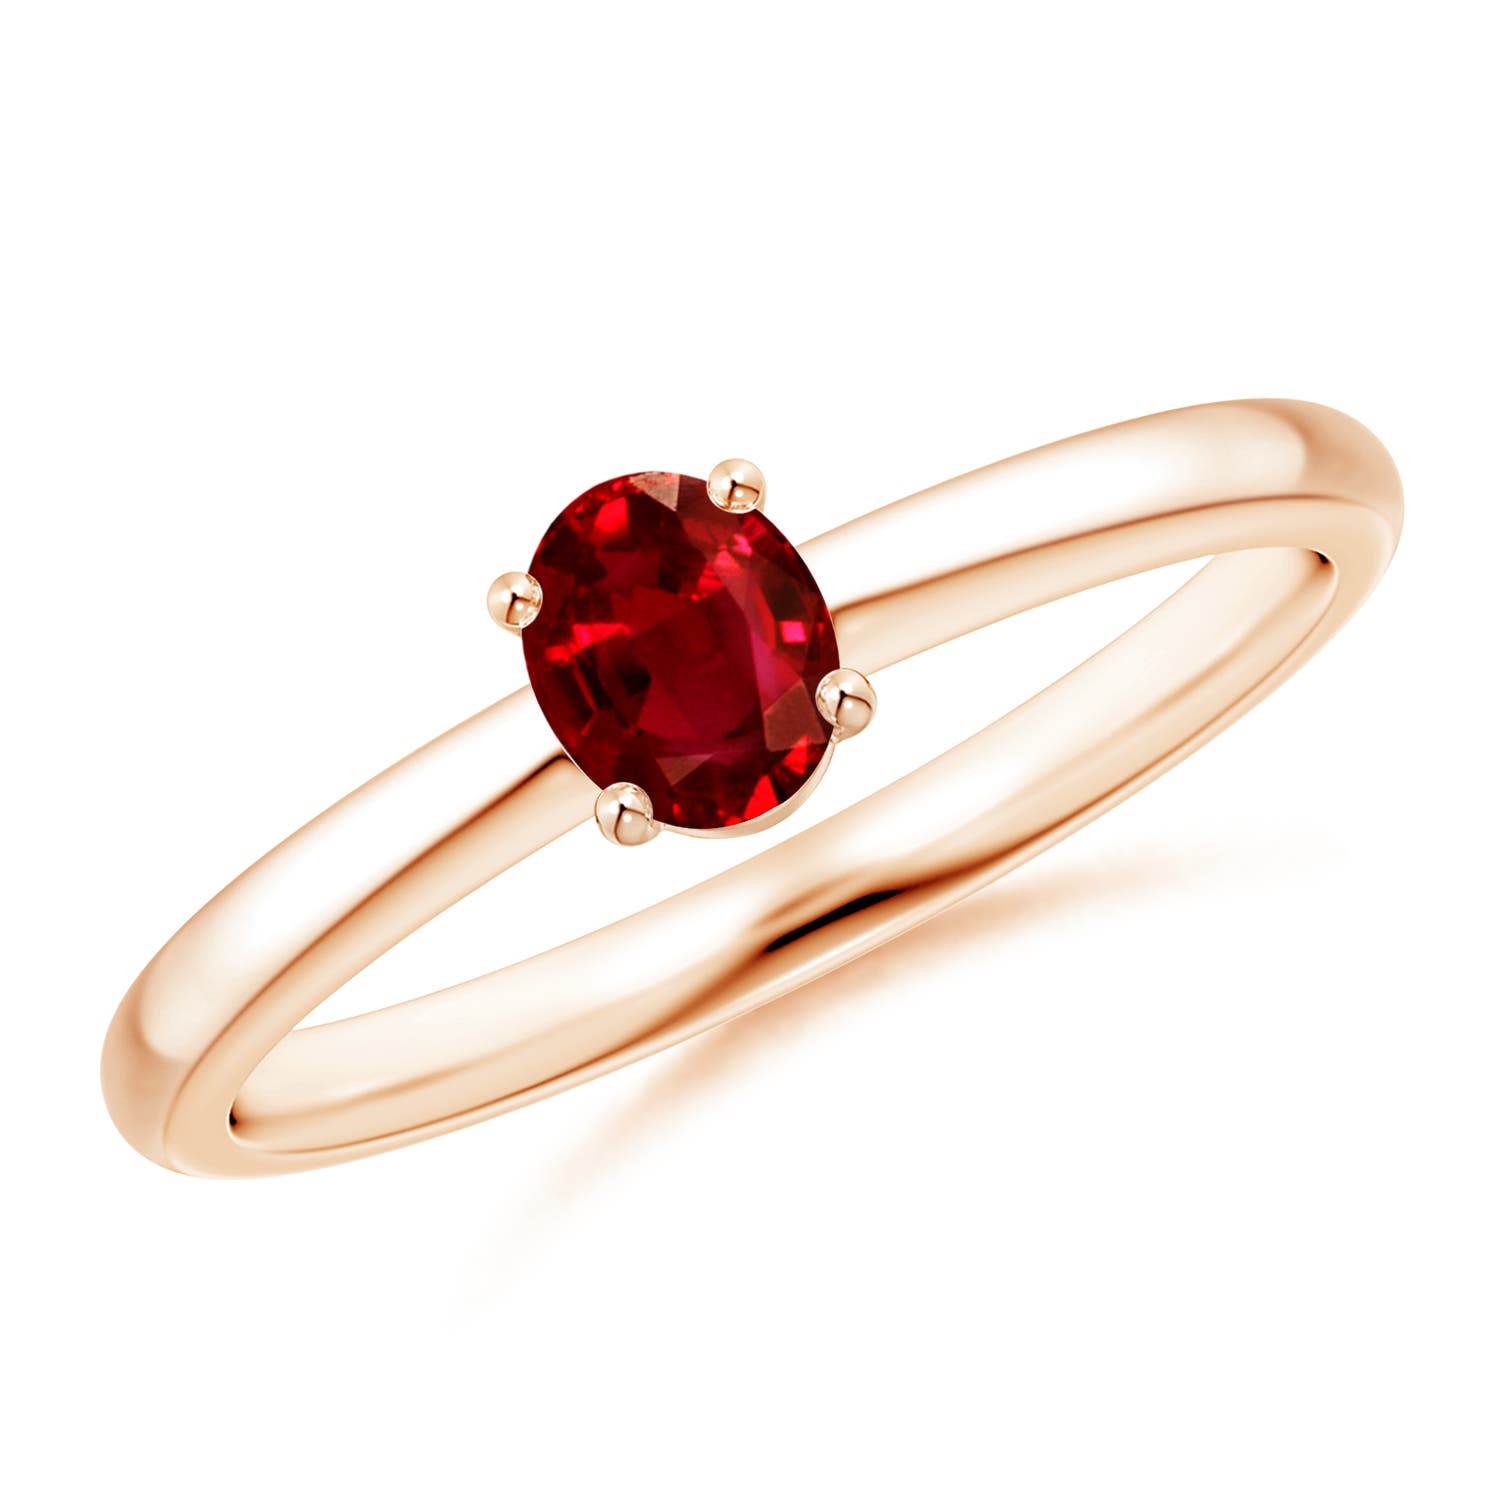 AAAA - Ruby / 0.4 CT / 14 KT Rose Gold